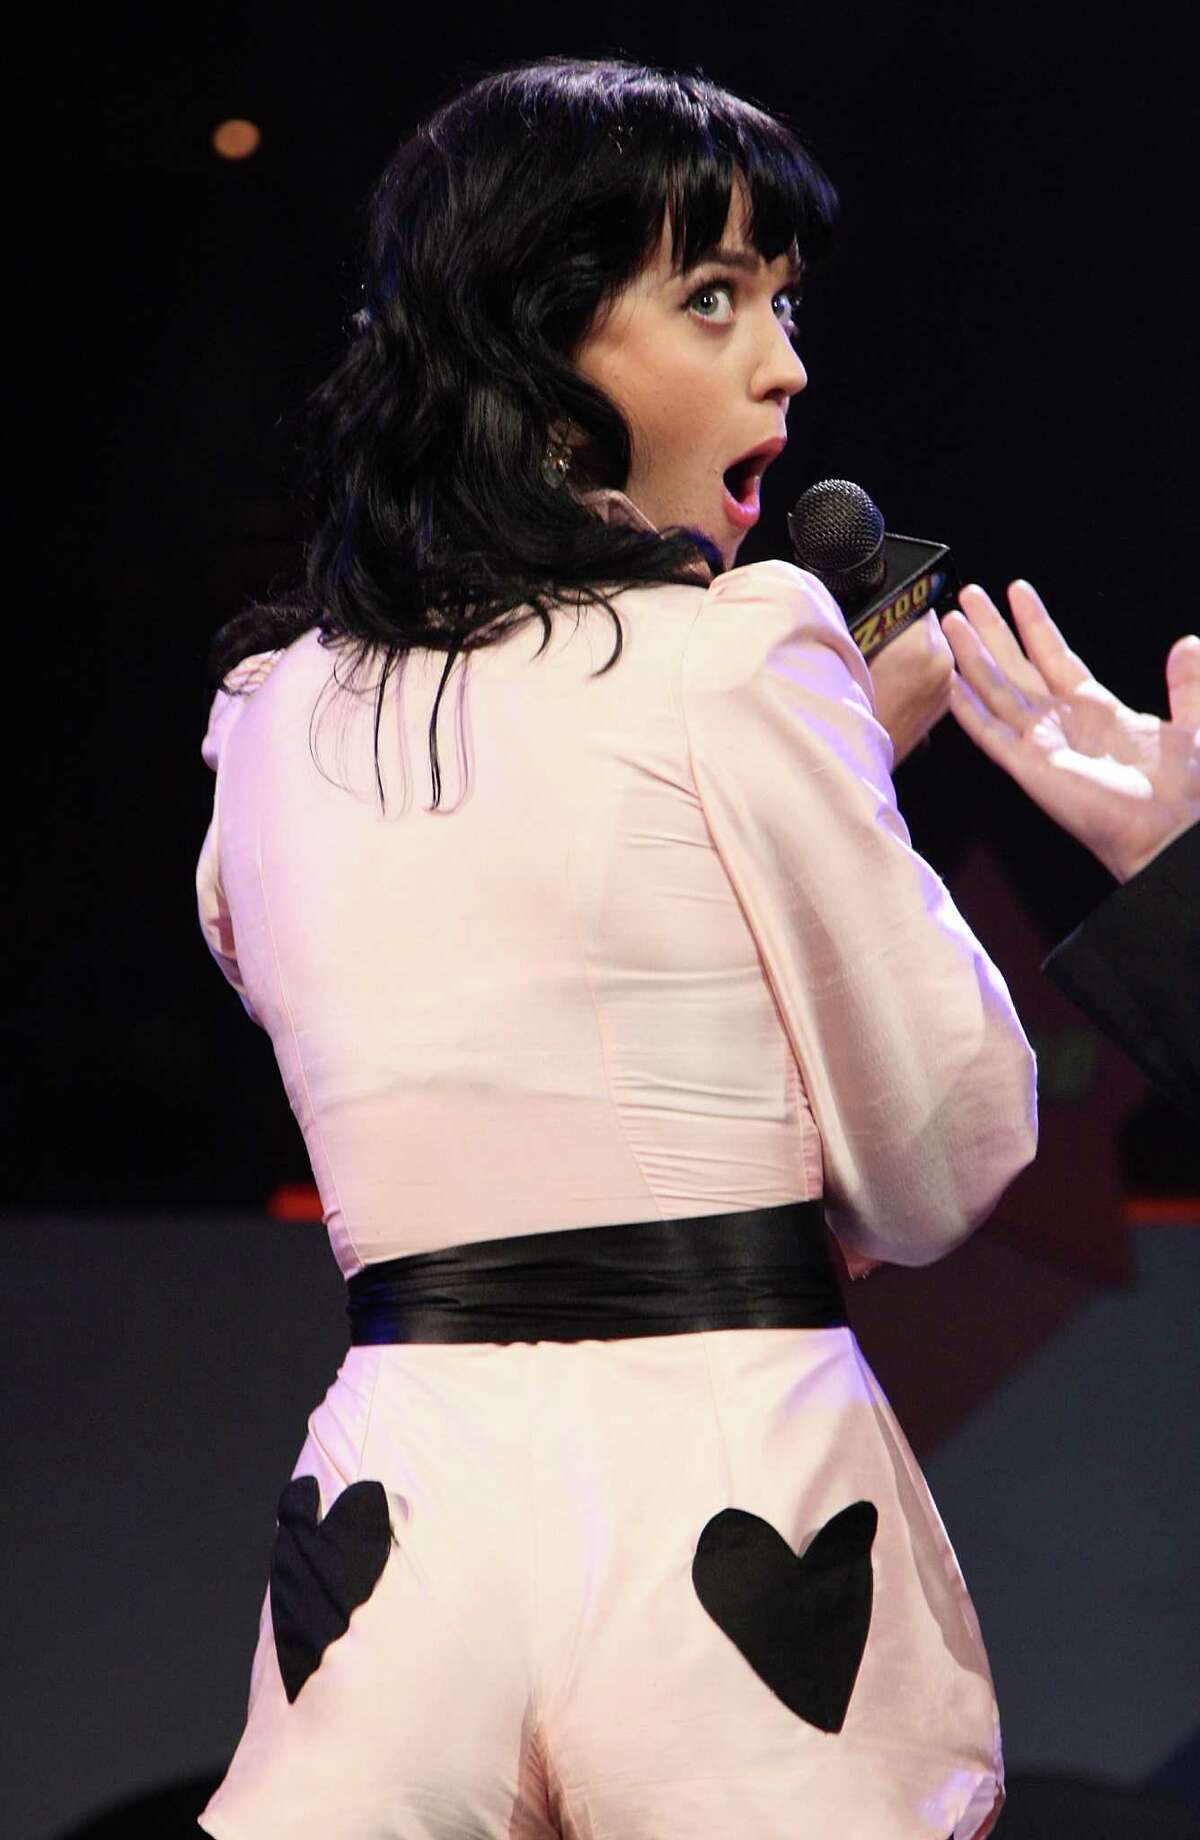 Katy Perry performs onstage during Z100's Zootopia at the IZOD Center on May 17, 2008 in East Rutherford, New Jersey.